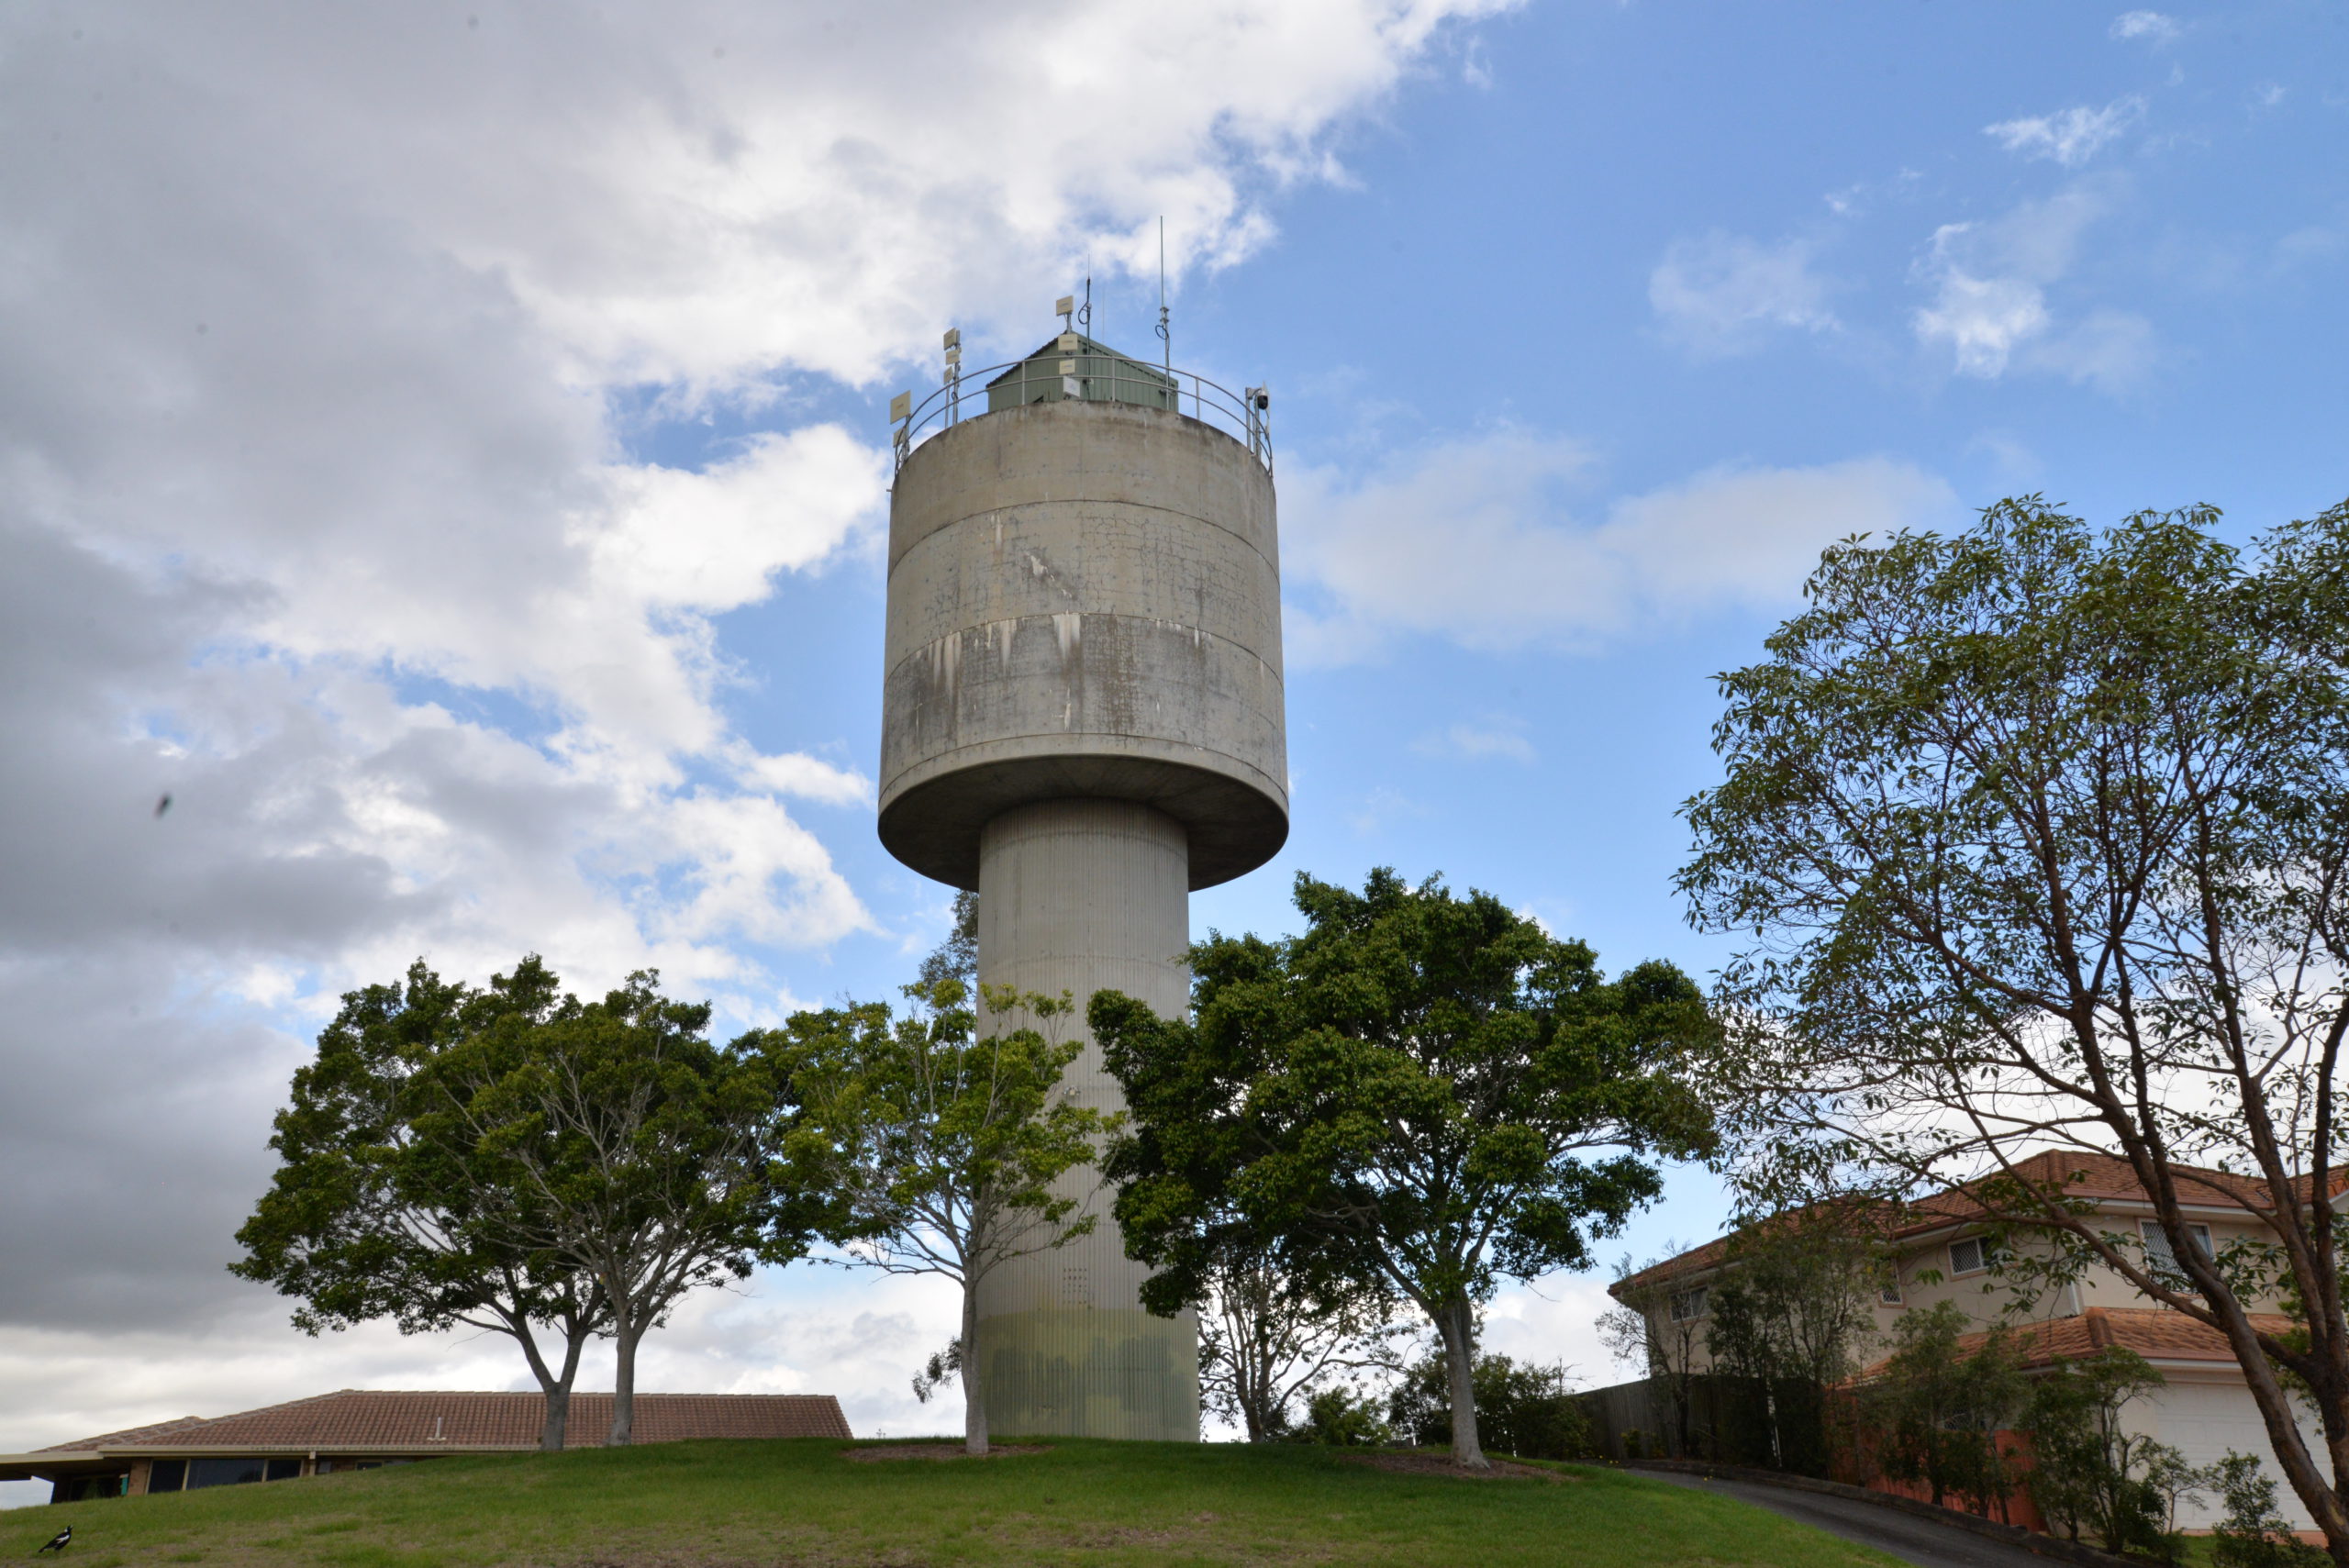 Edens Landing Water tower now has safety cameras